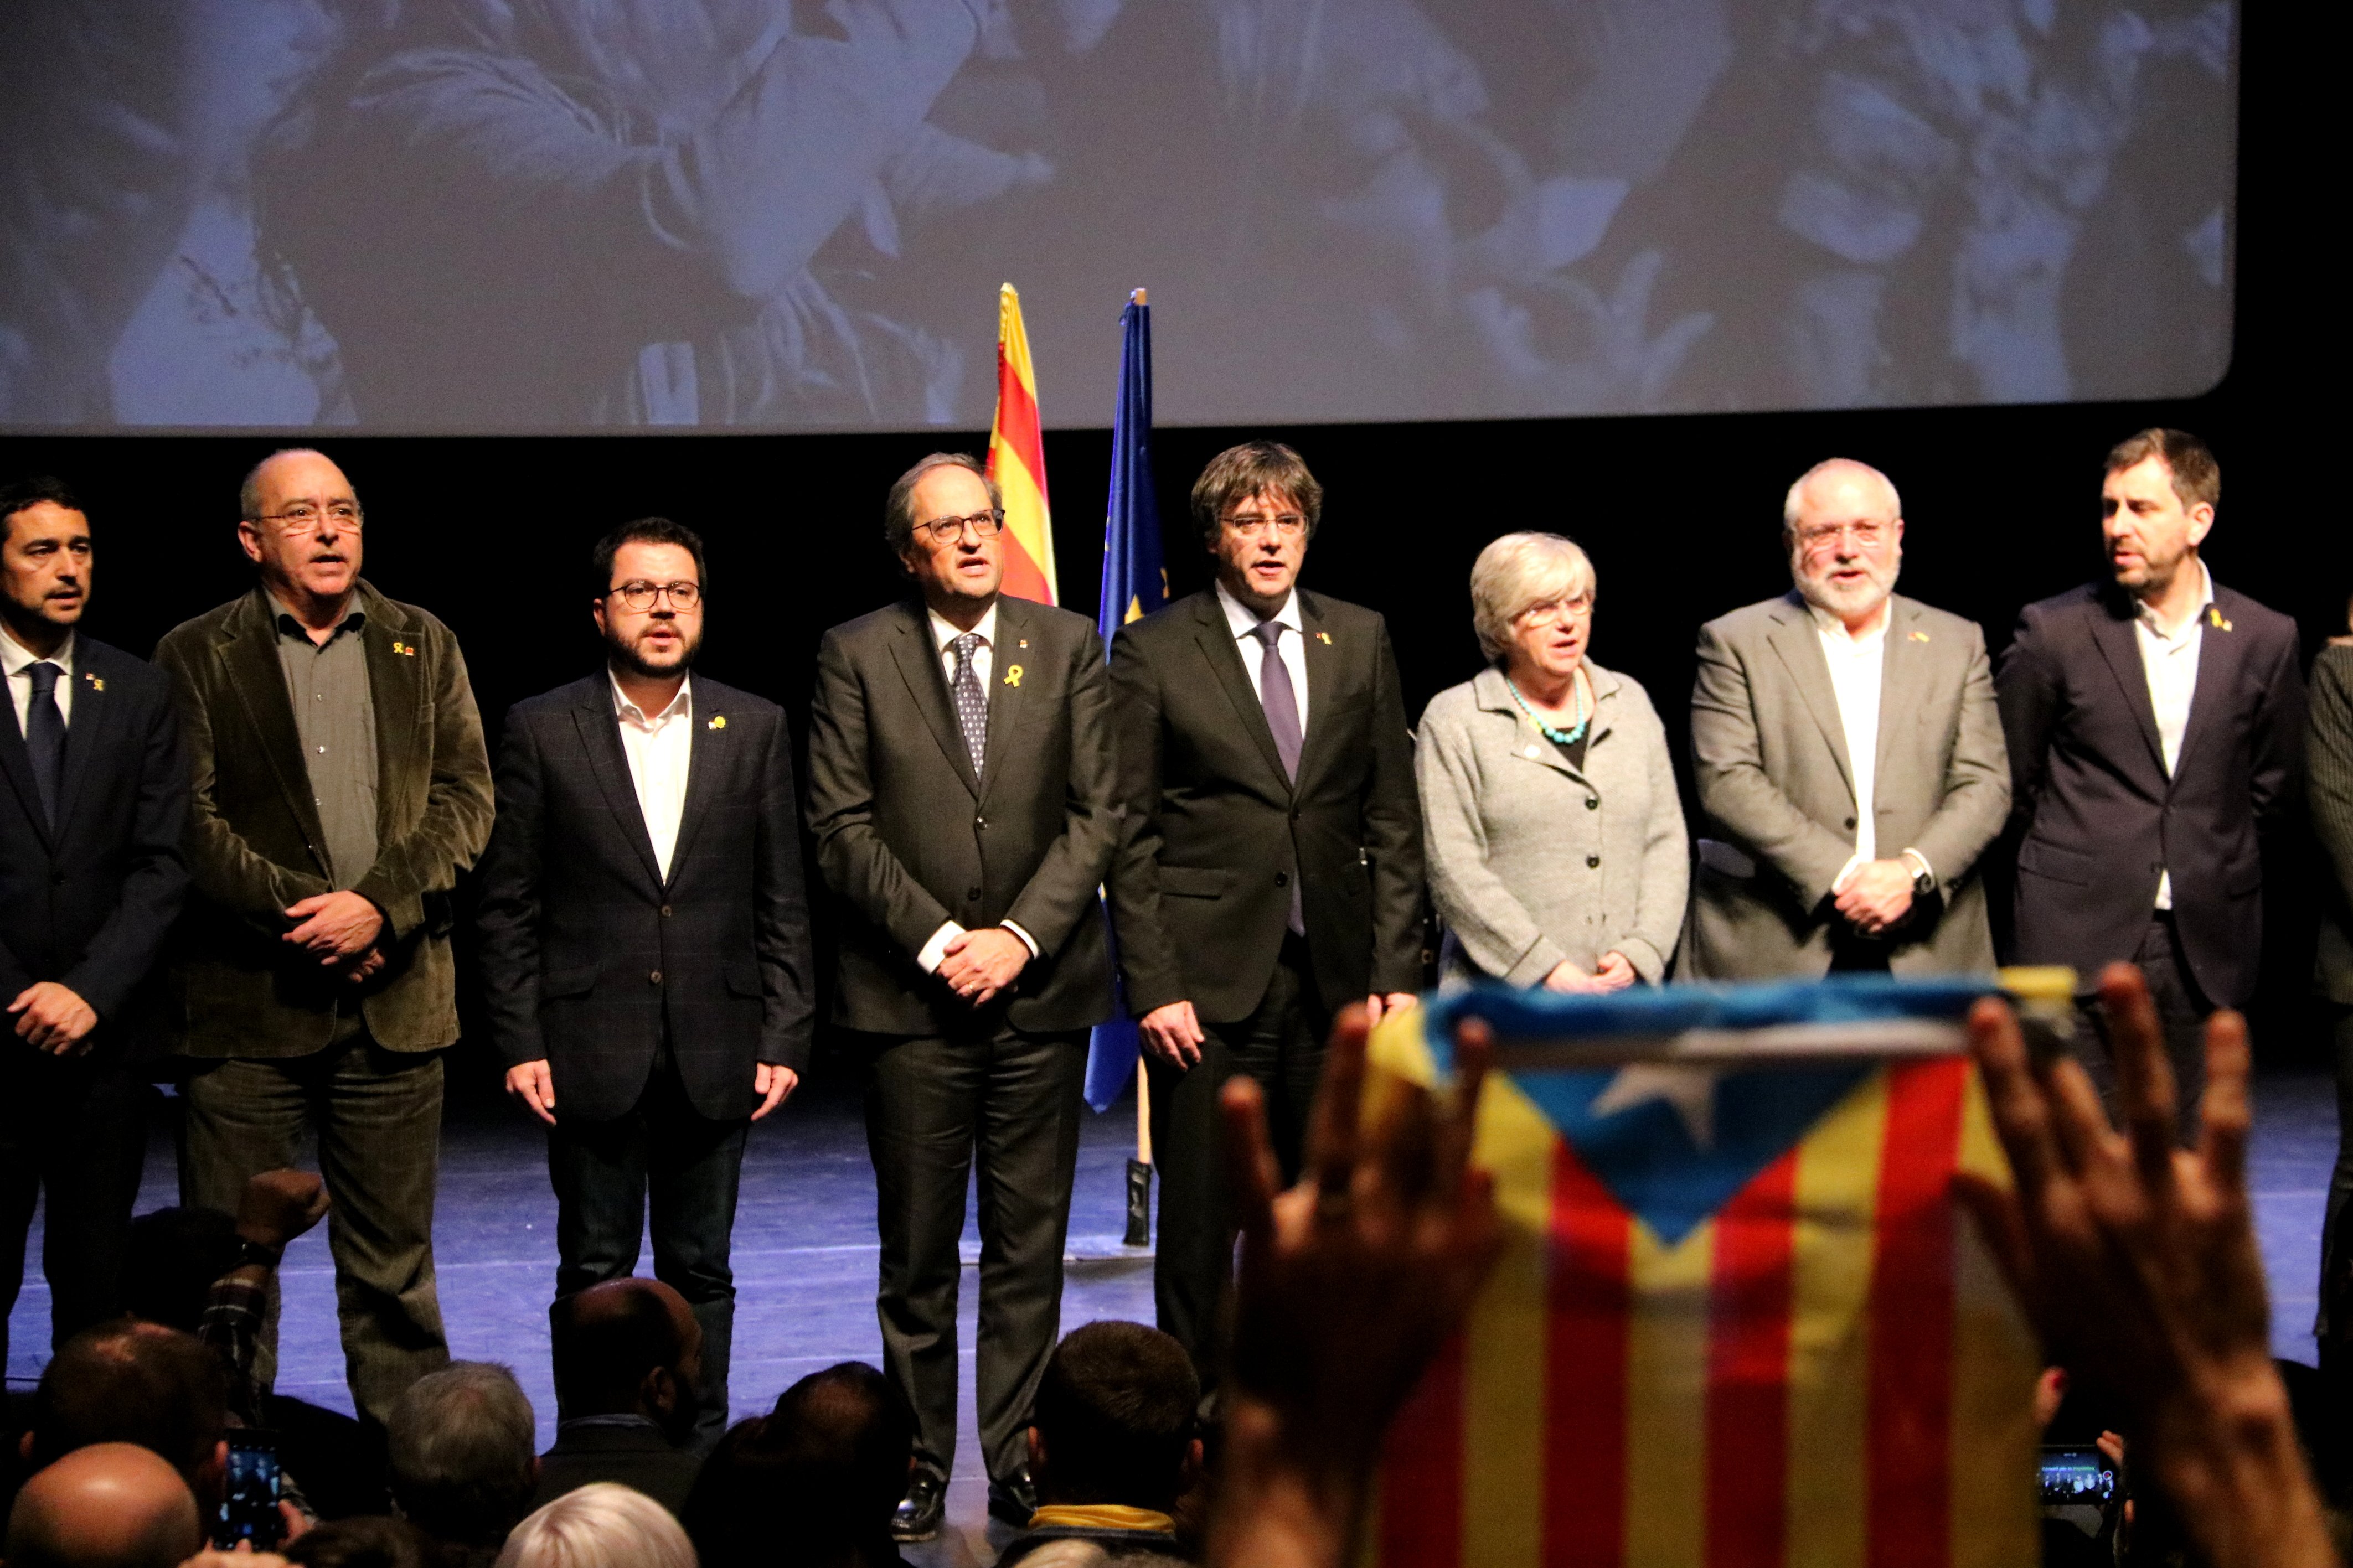 Puigdemont leads a citizen initiative to suspend Spain's voting rights at the EU